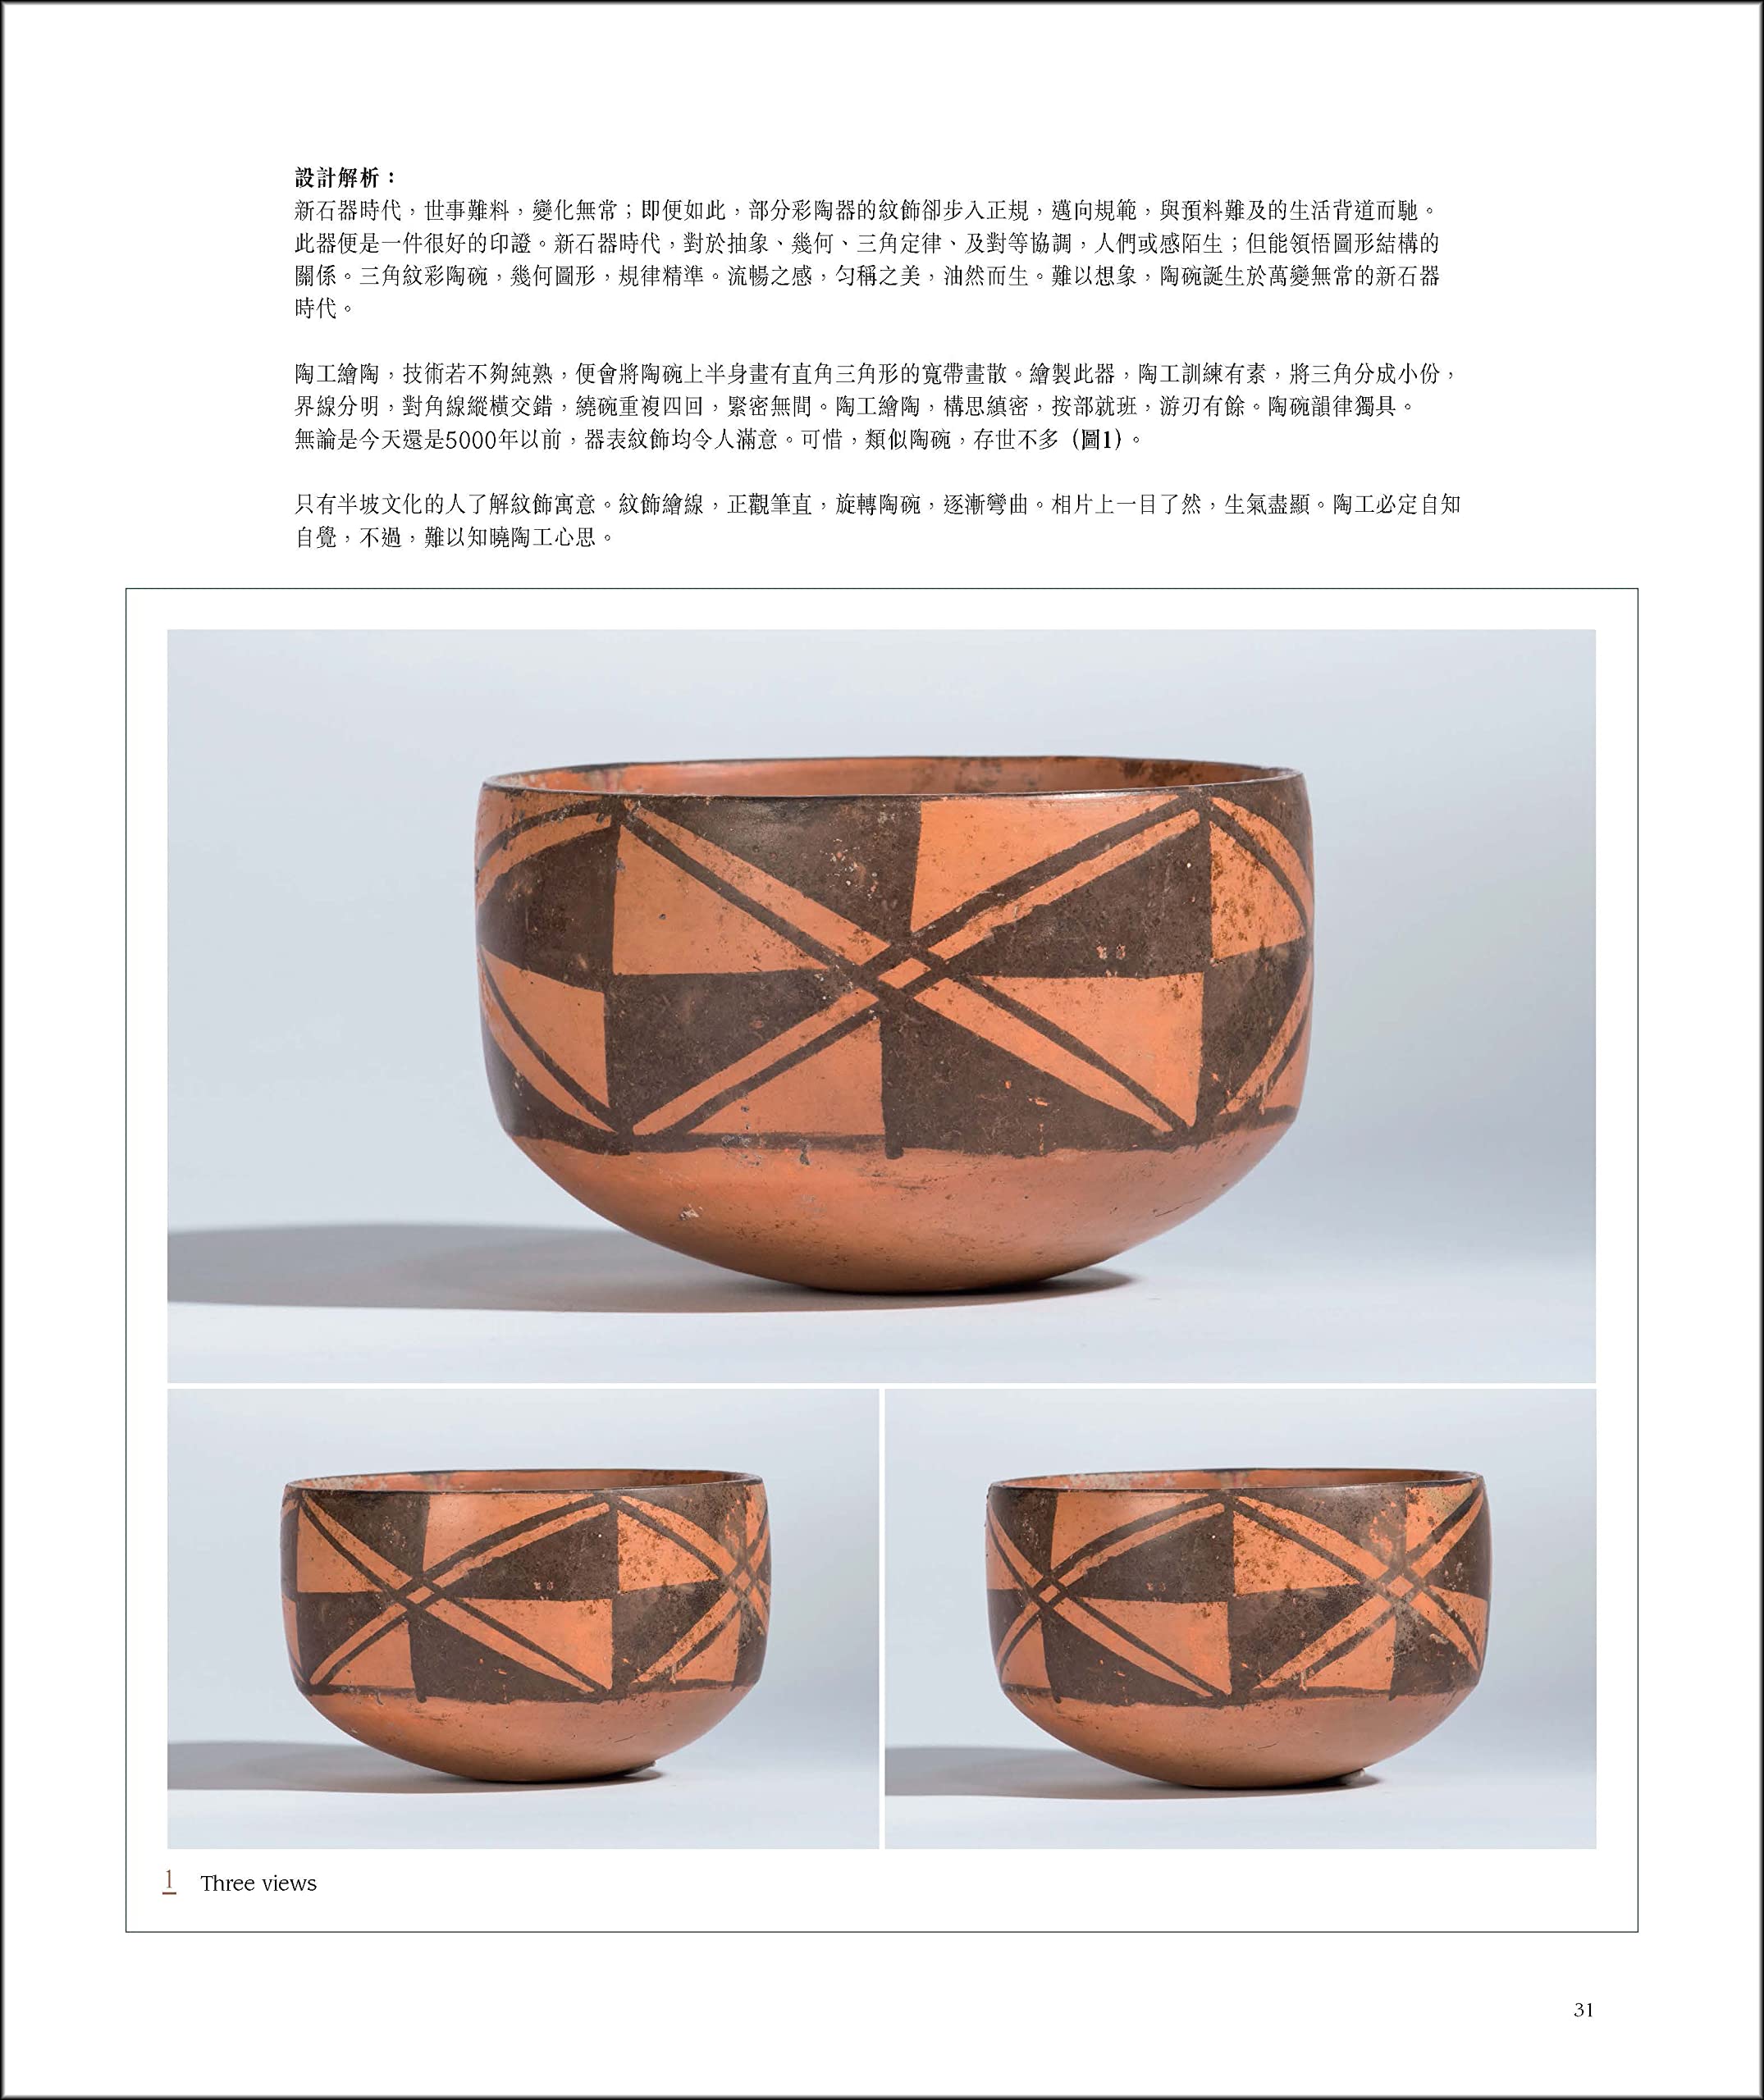 The Pottery Age: An Appreciation of Neolithic Ceramics from China Circa 7000 bc - Circa 1000 bc (Chinese and English Edition)